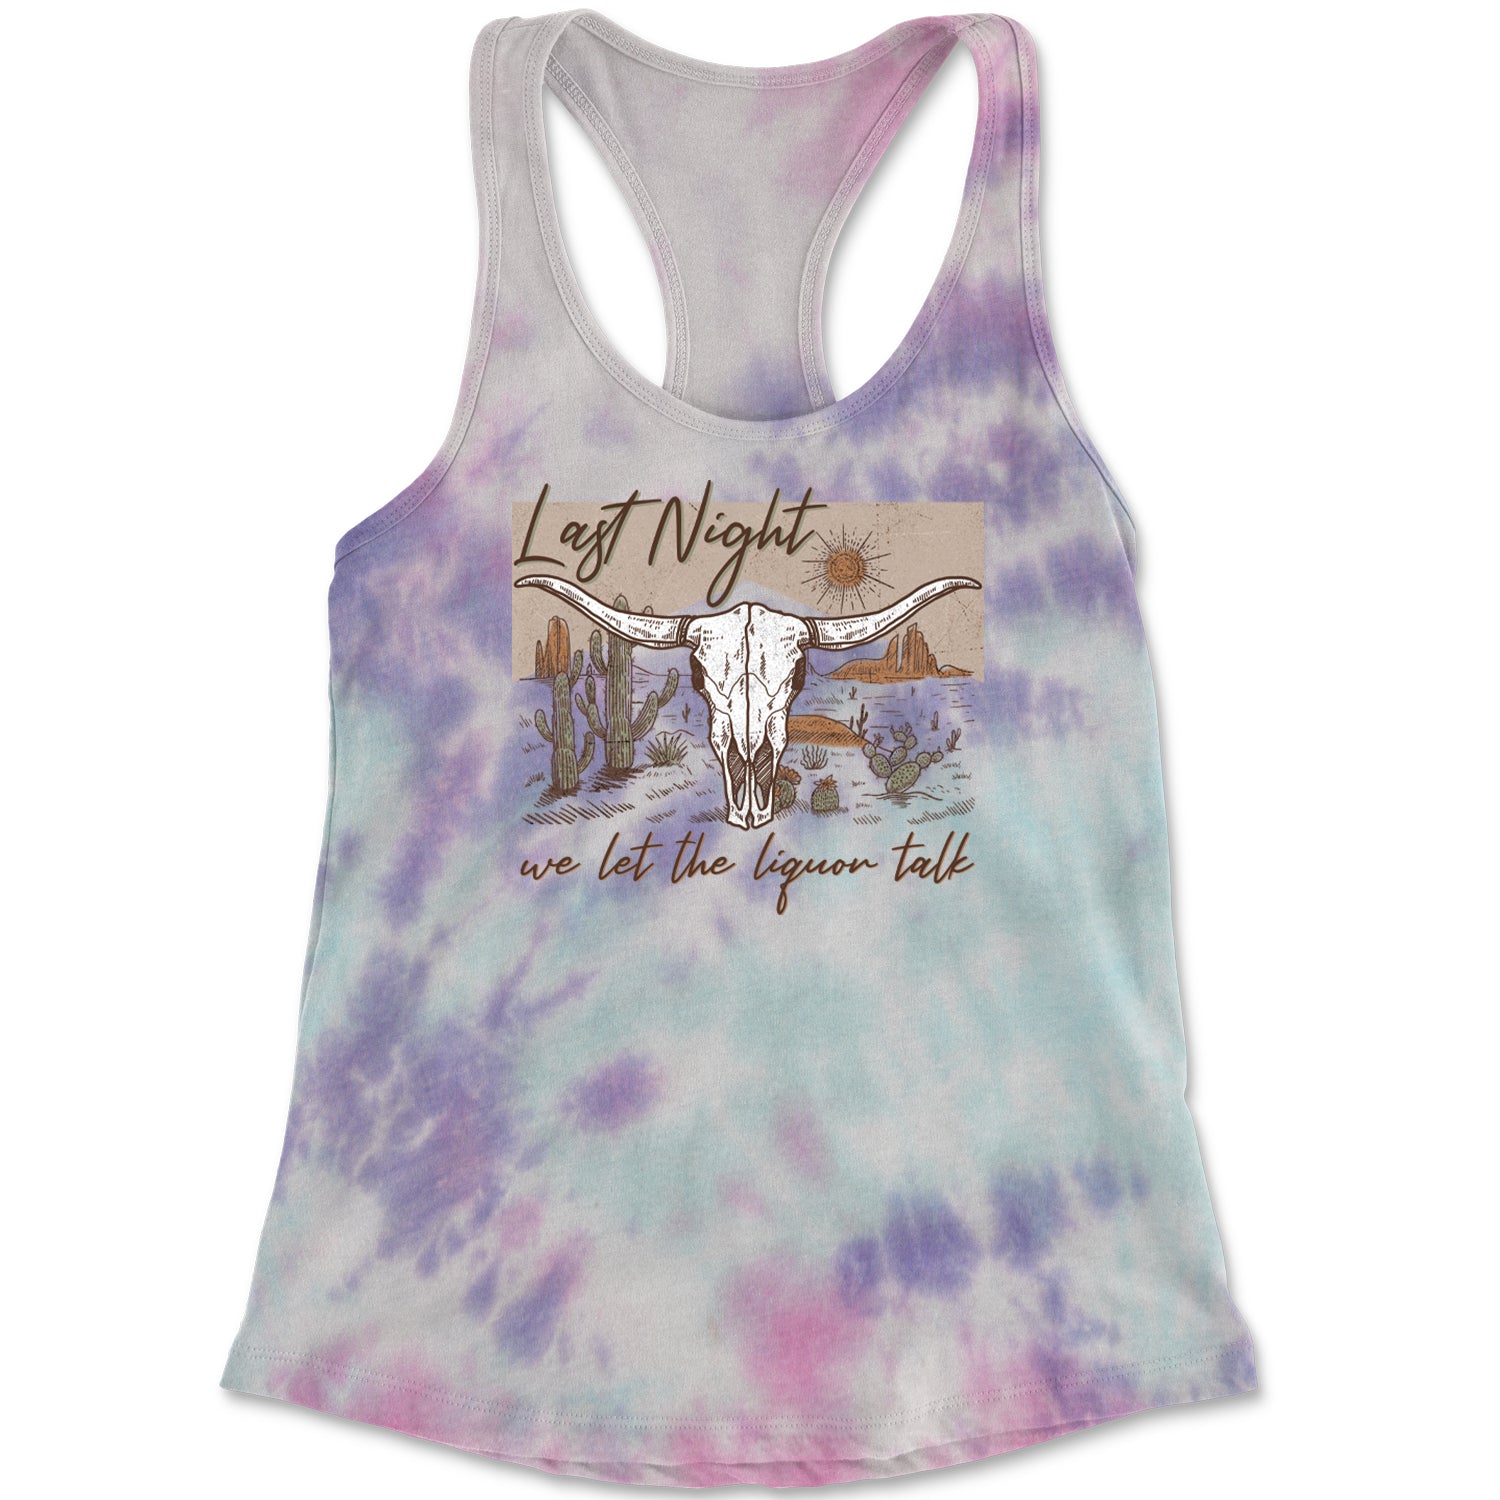 Last Night We Let The Liquor Talk Country Music Western Racerback Tank Top for Women